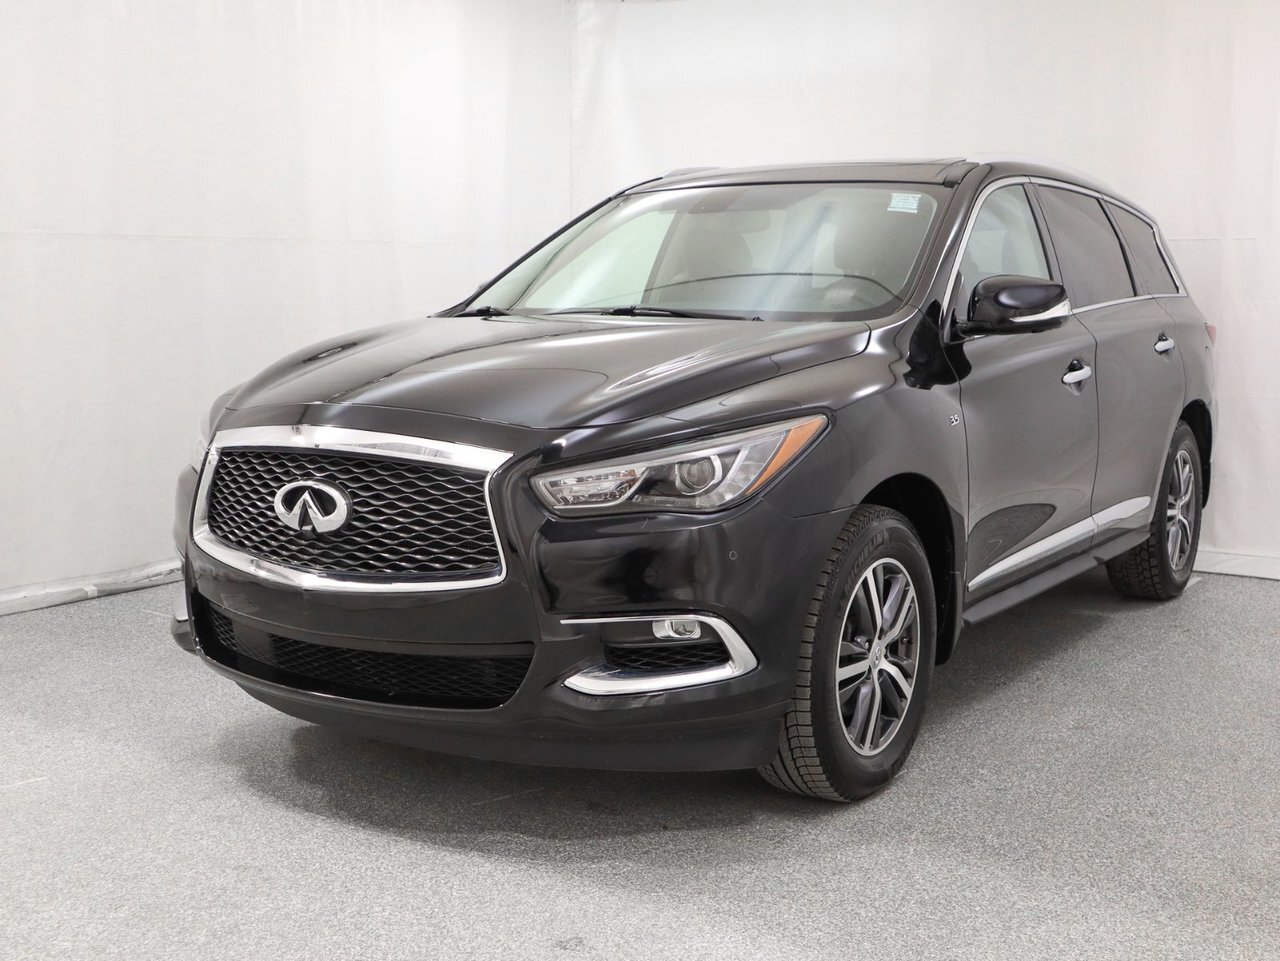 2017 Infiniti QX60 Base REARVIEW CAMERA | LEATHER SEATS | HEATED SEAT